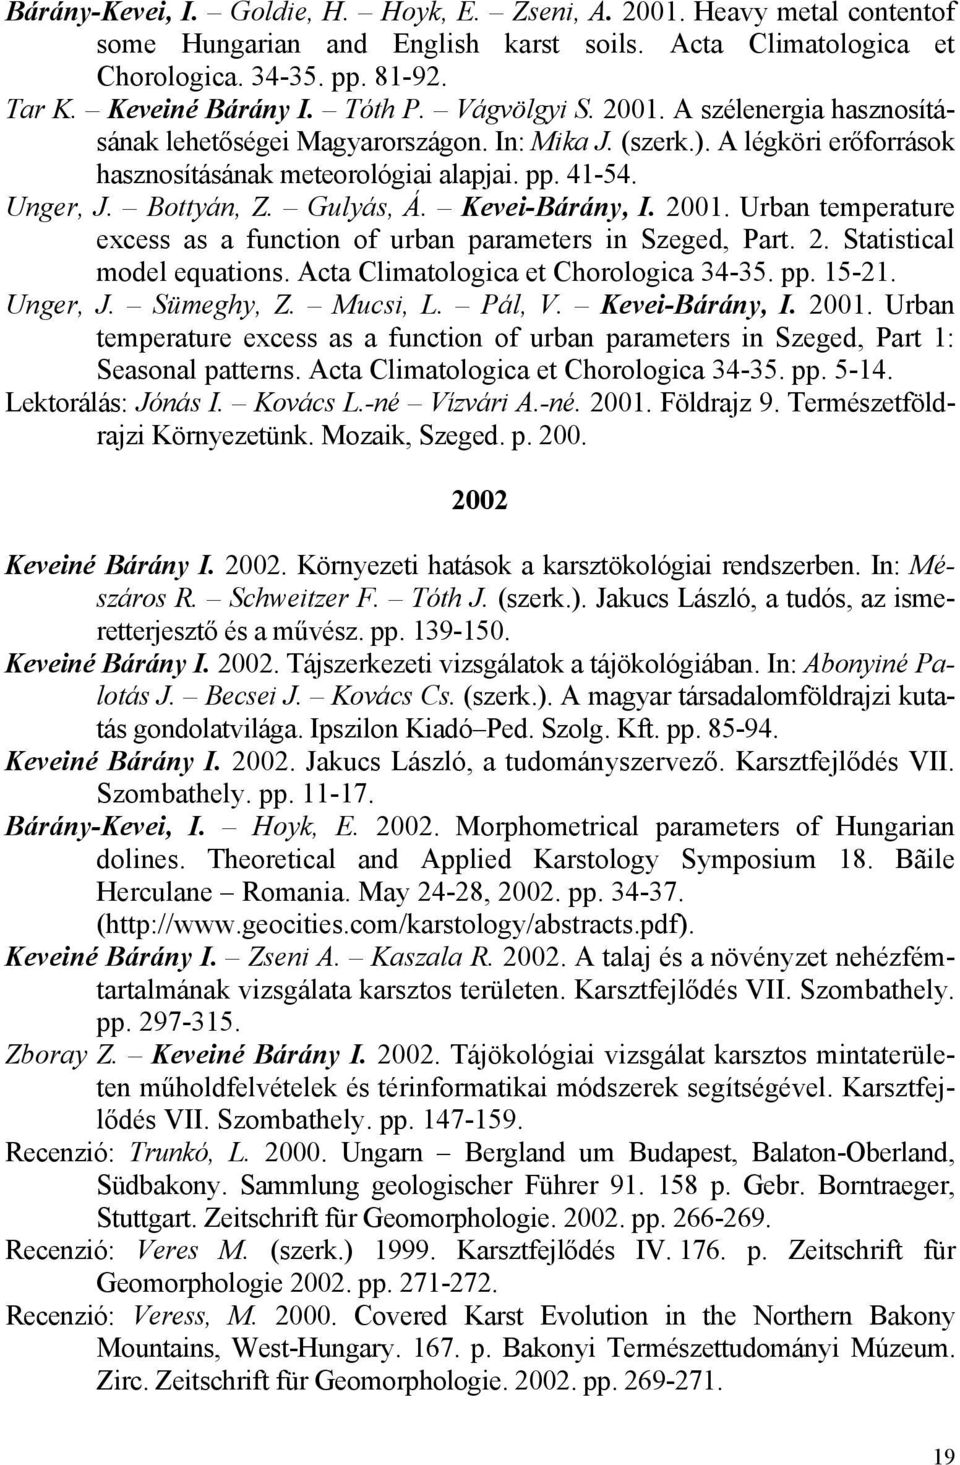 Gulyás, Á. Kevei-Bárány, I. 2001. Urban temperature excess as a function of urban parameters in Szeged, Part. 2. Statistical model equations. Acta Climatologica et Chorologica 34-35. pp. 15-21.